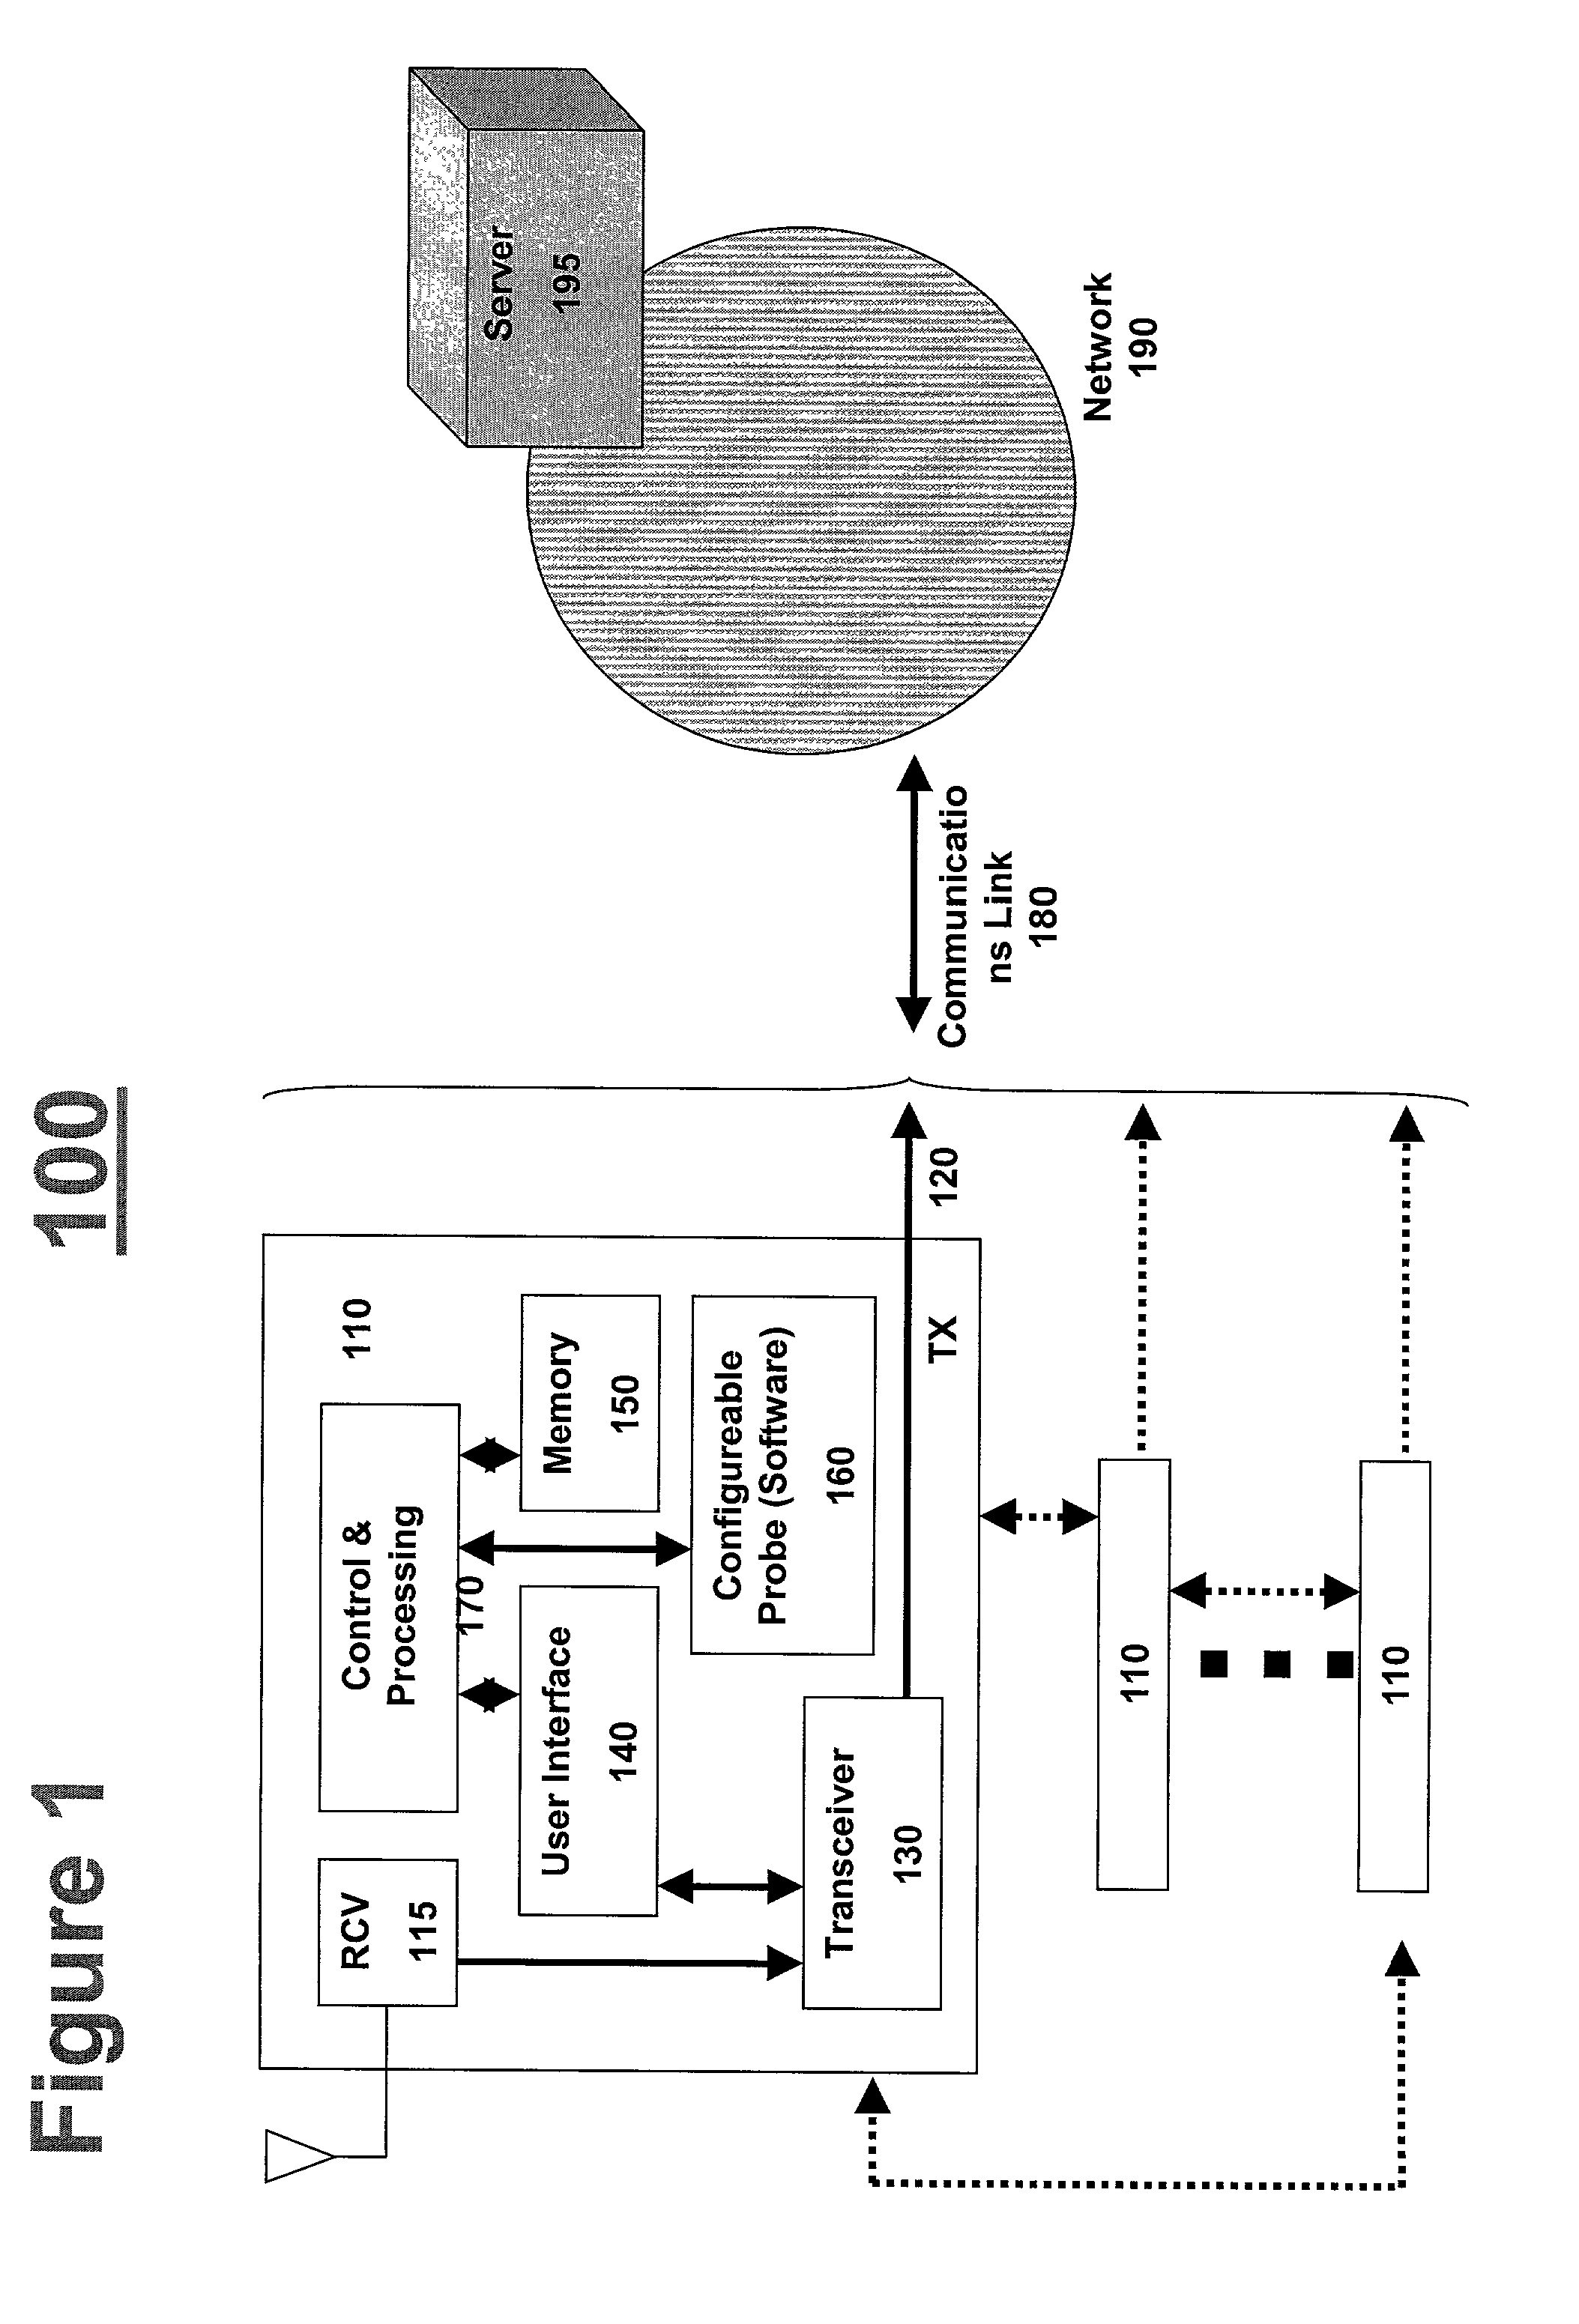 Method and system for improved monitoring, measurement and analysis of communication networks utilizing dynamically and remotely configurable probes